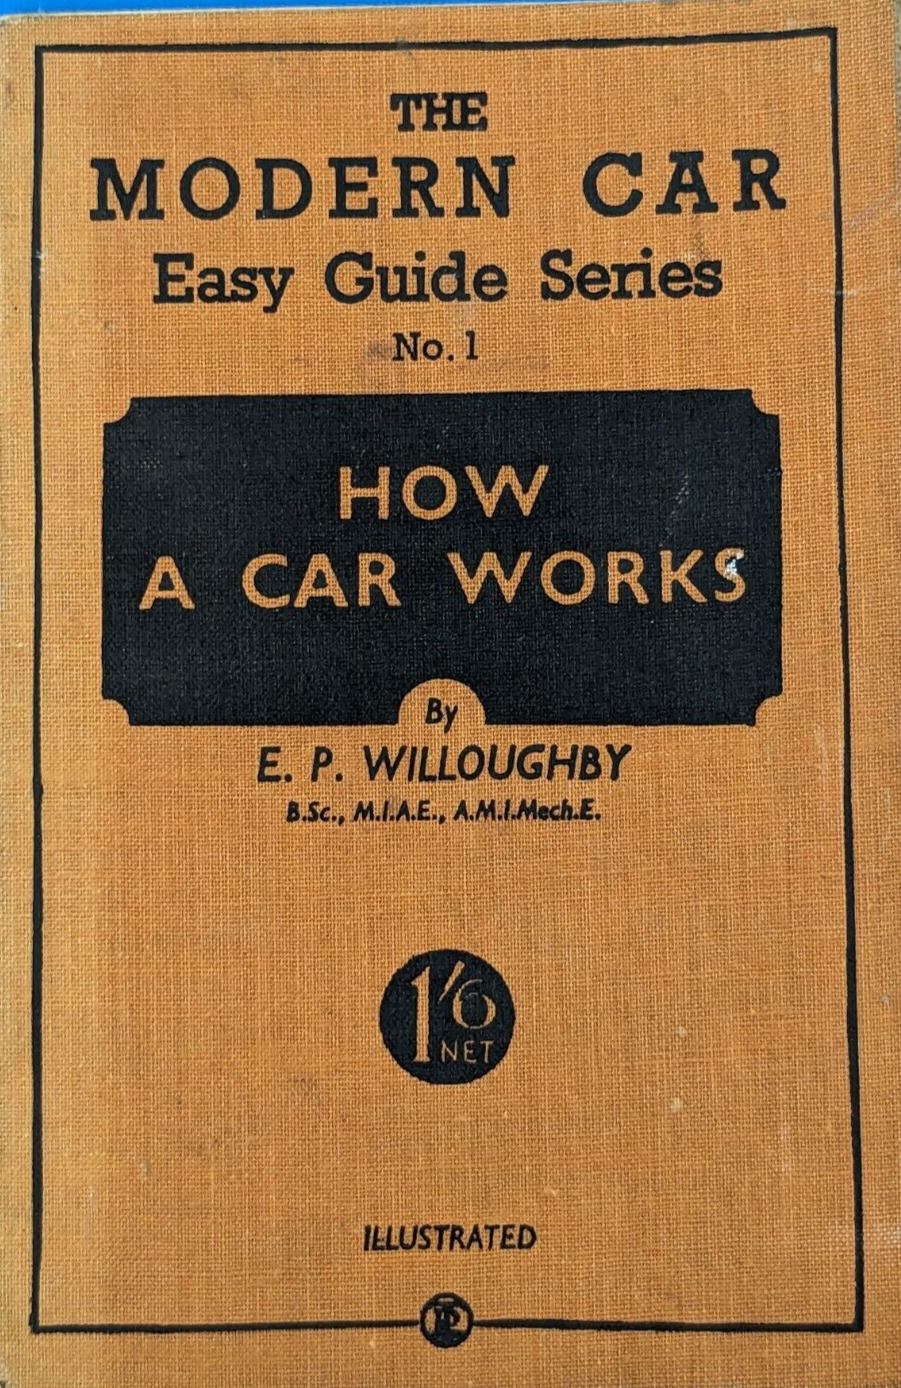 The Modern Car Easy Guide Series No.1, How a Car Works, c1950, Vintage